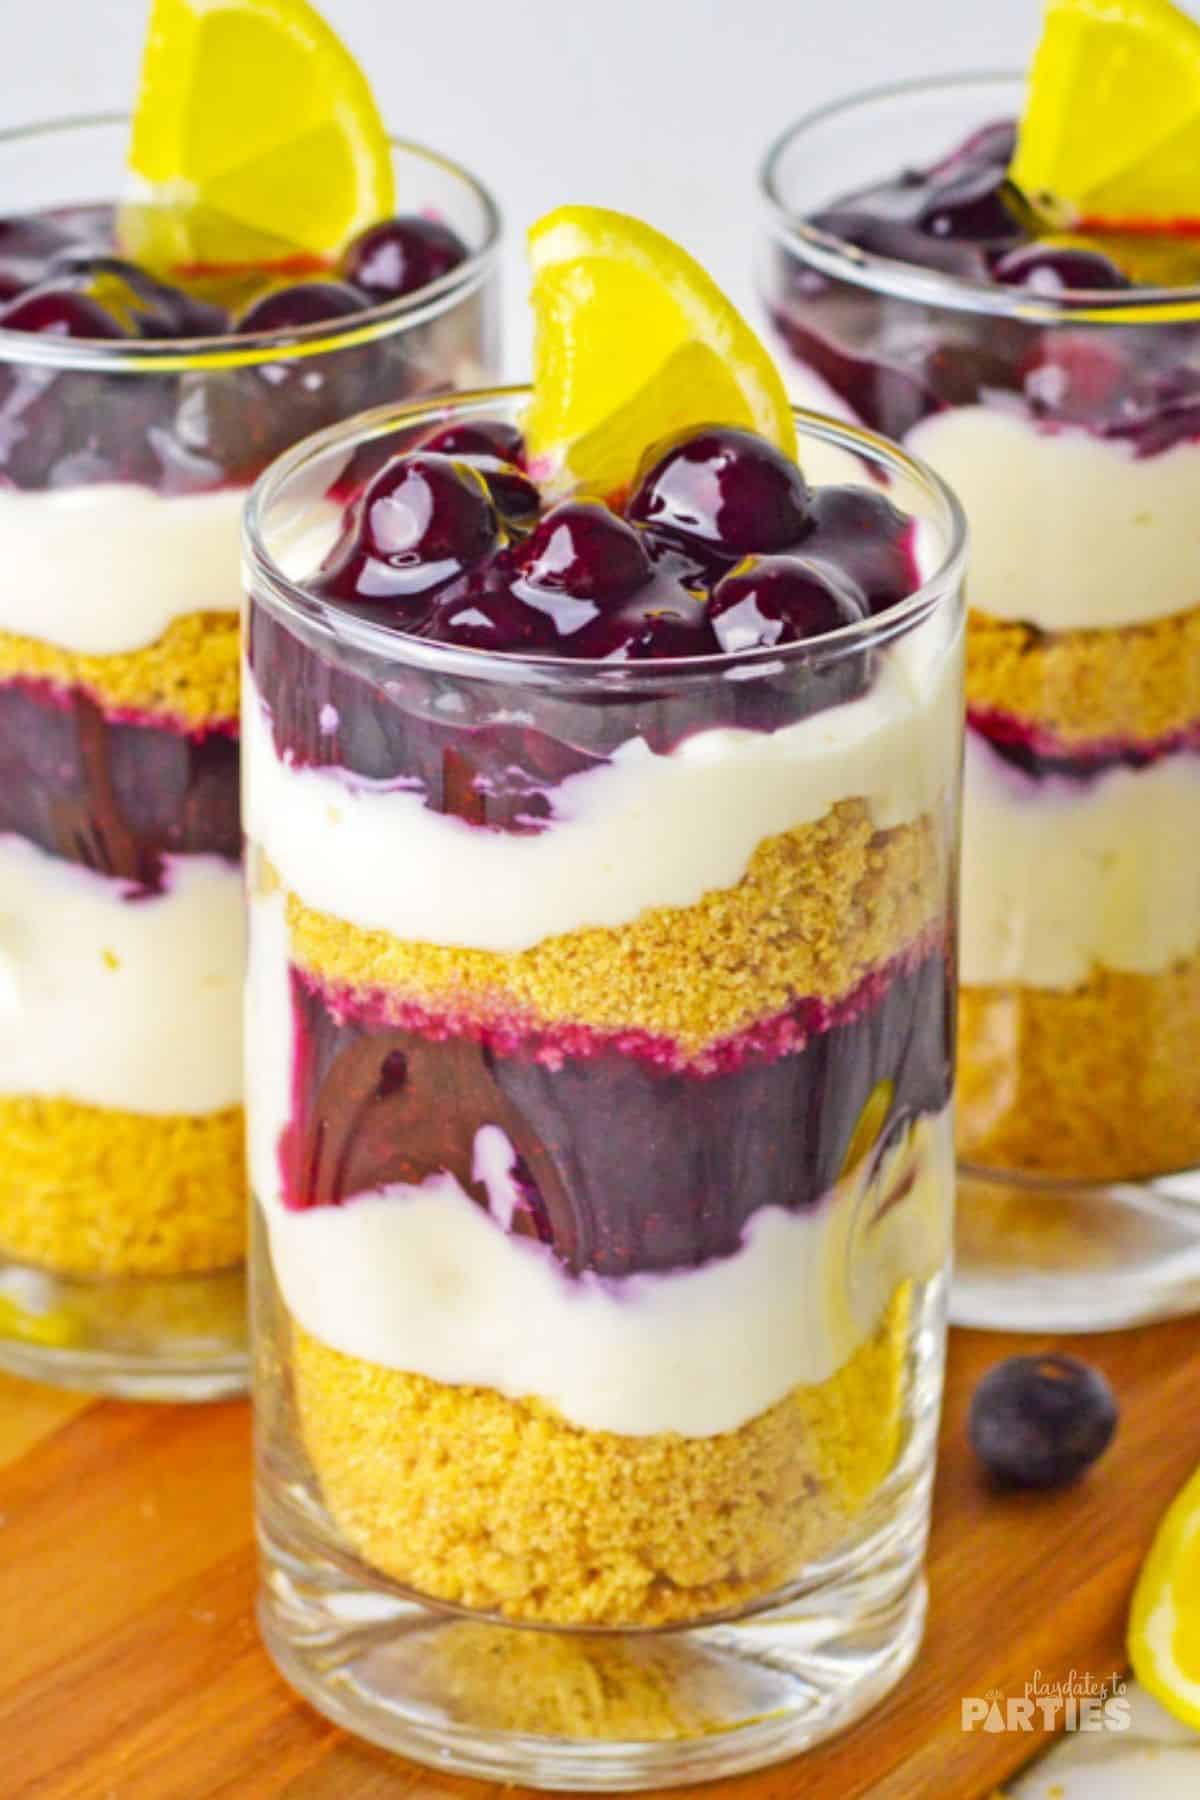 Parfaits made with six layers, including blueberry sauce, cheesecake, and graham crackers.